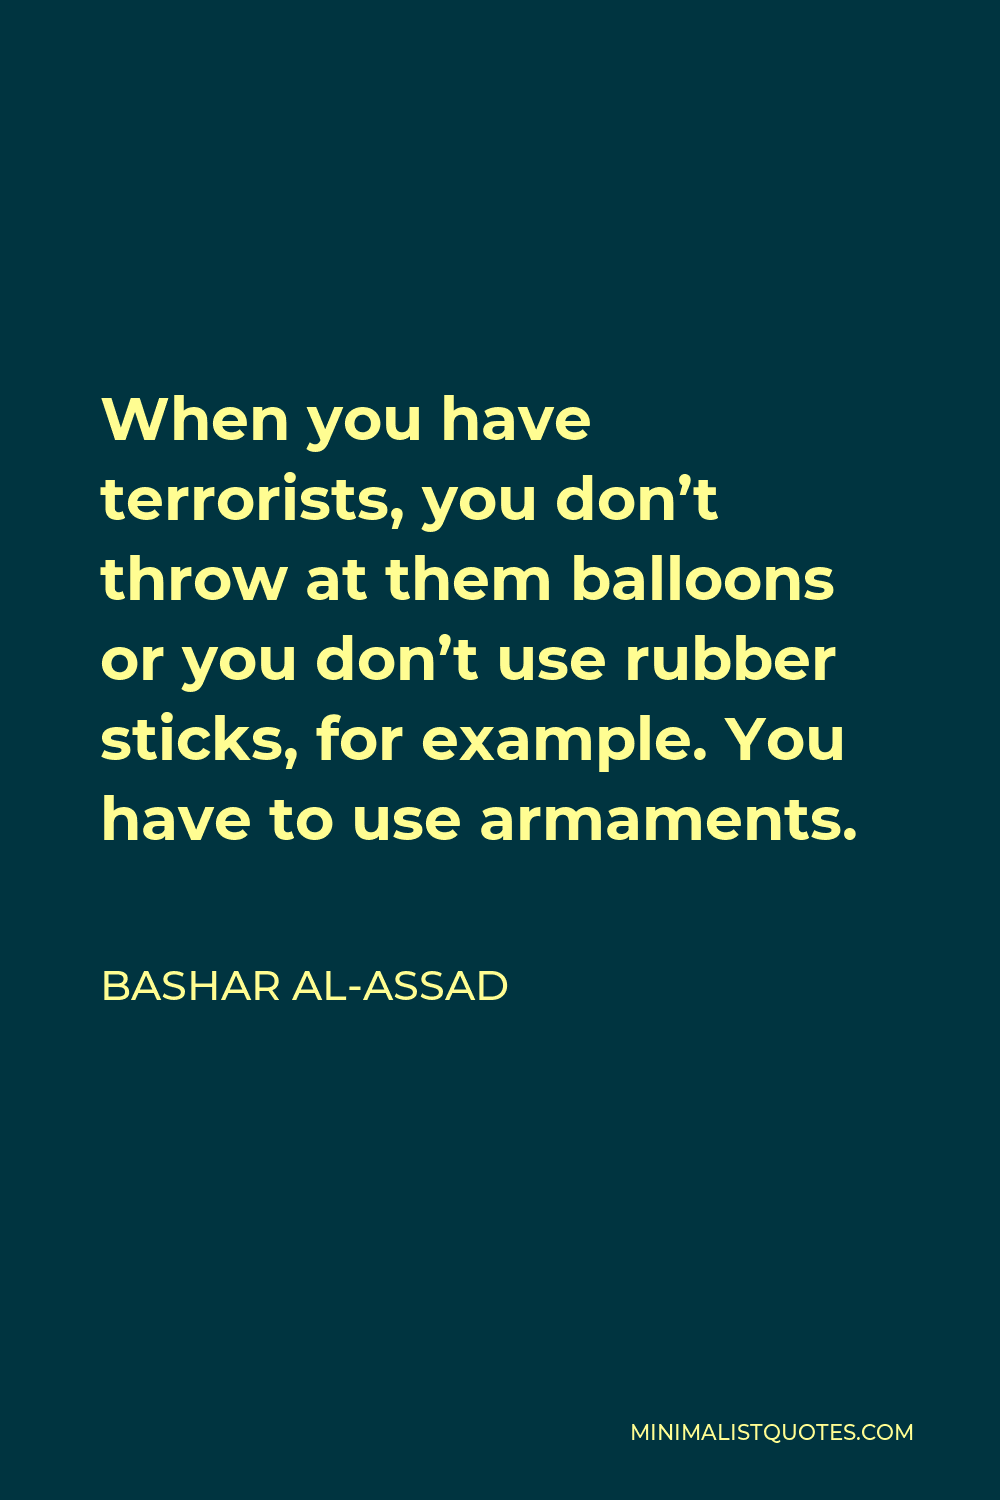 Bashar al-Assad Quote - When you have terrorists, you don’t throw at them balloons or you don’t use rubber sticks, for example. You have to use armaments.